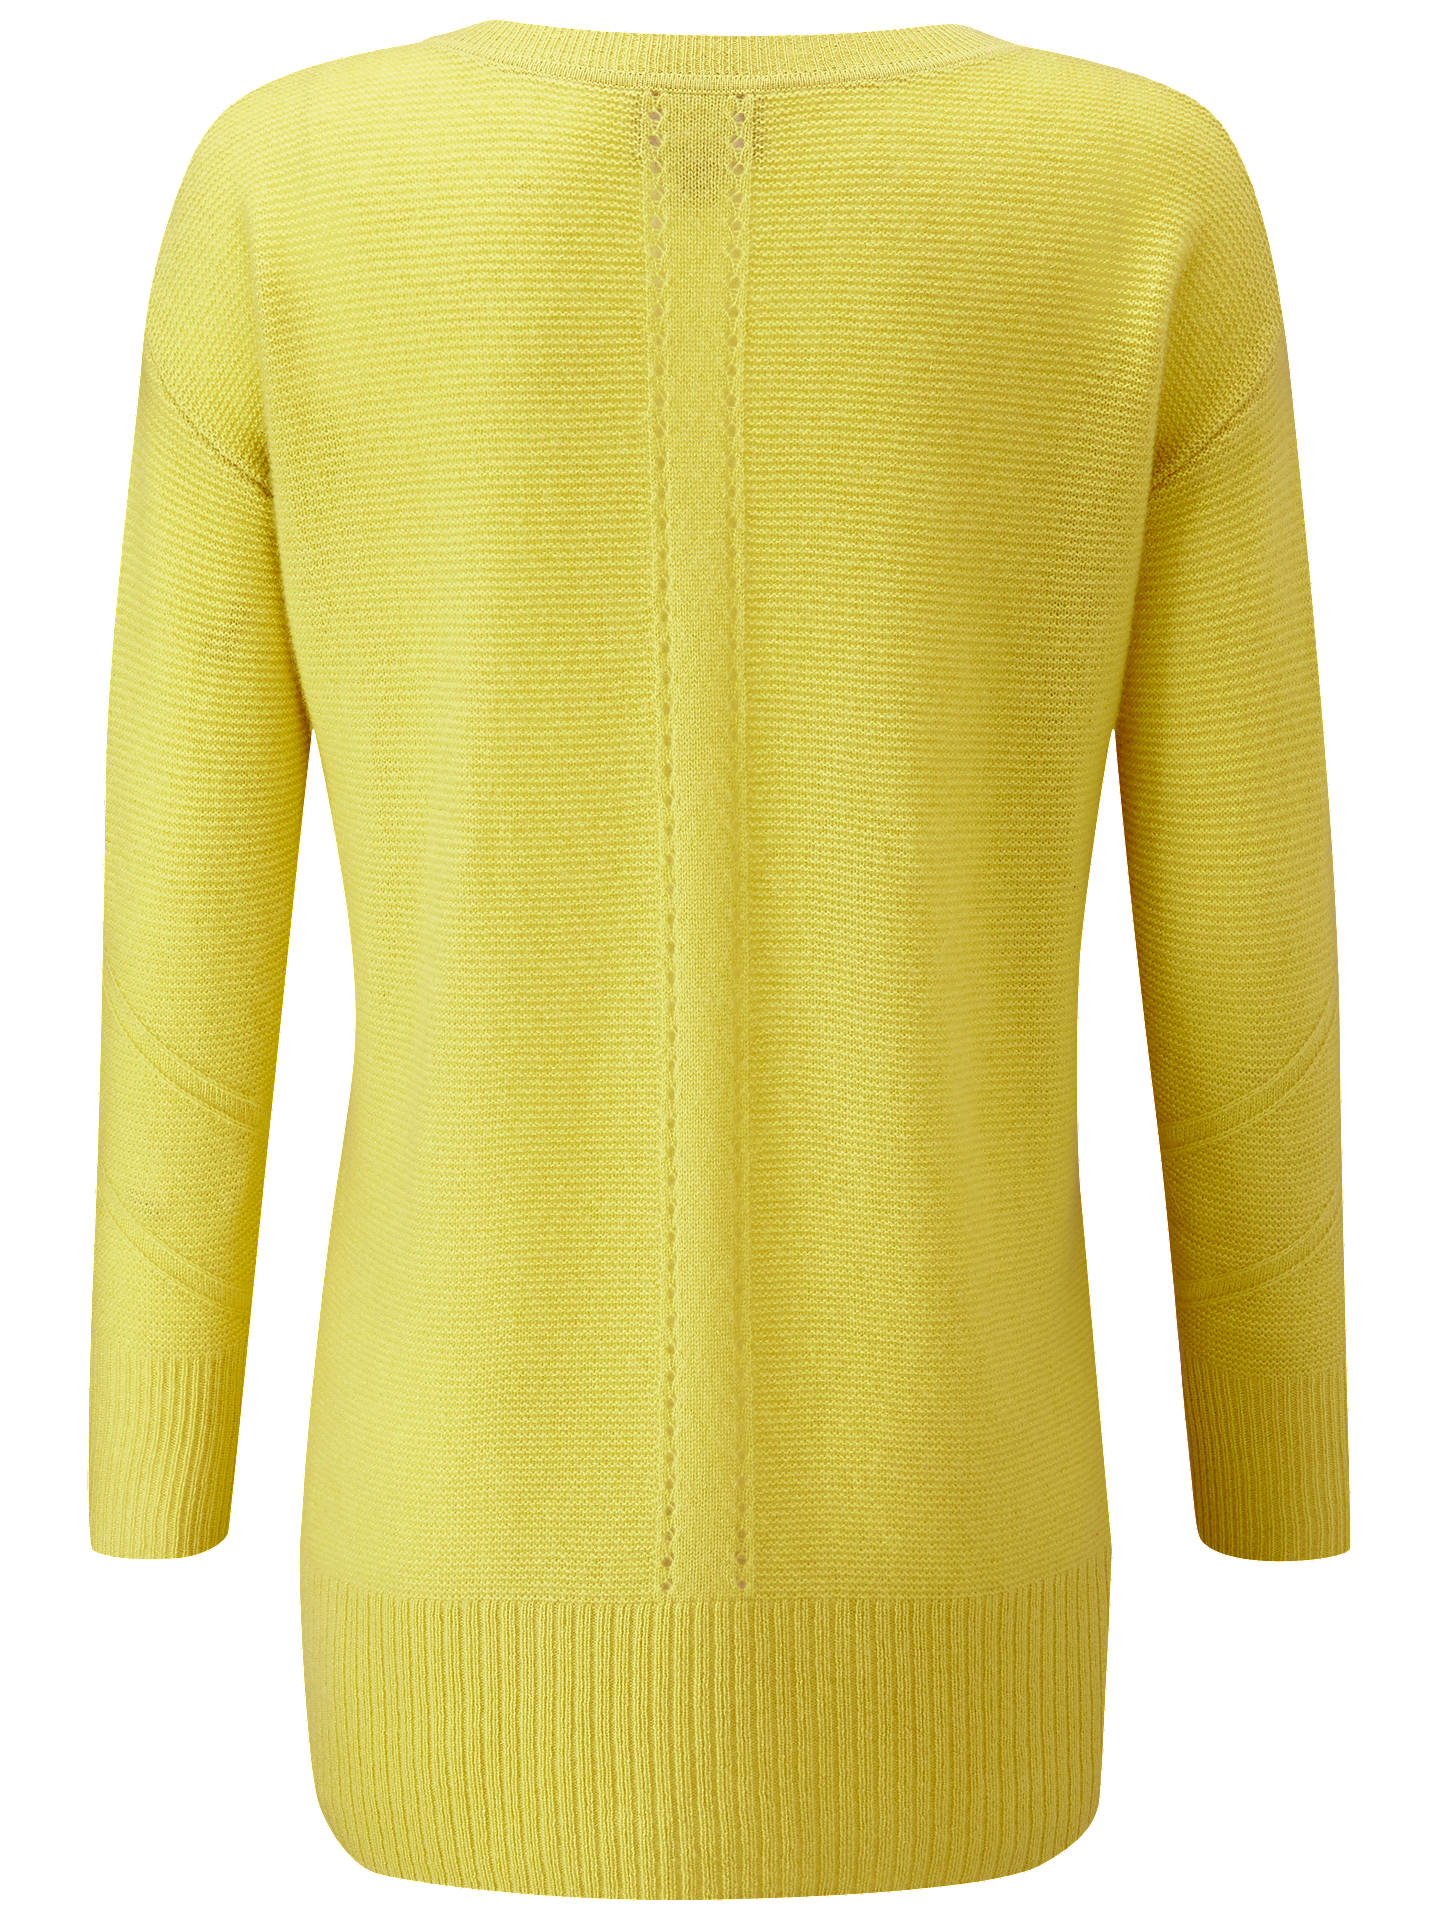 Chartreuse | Cashmere Textured Crew Neck Sweater | Pure Collection